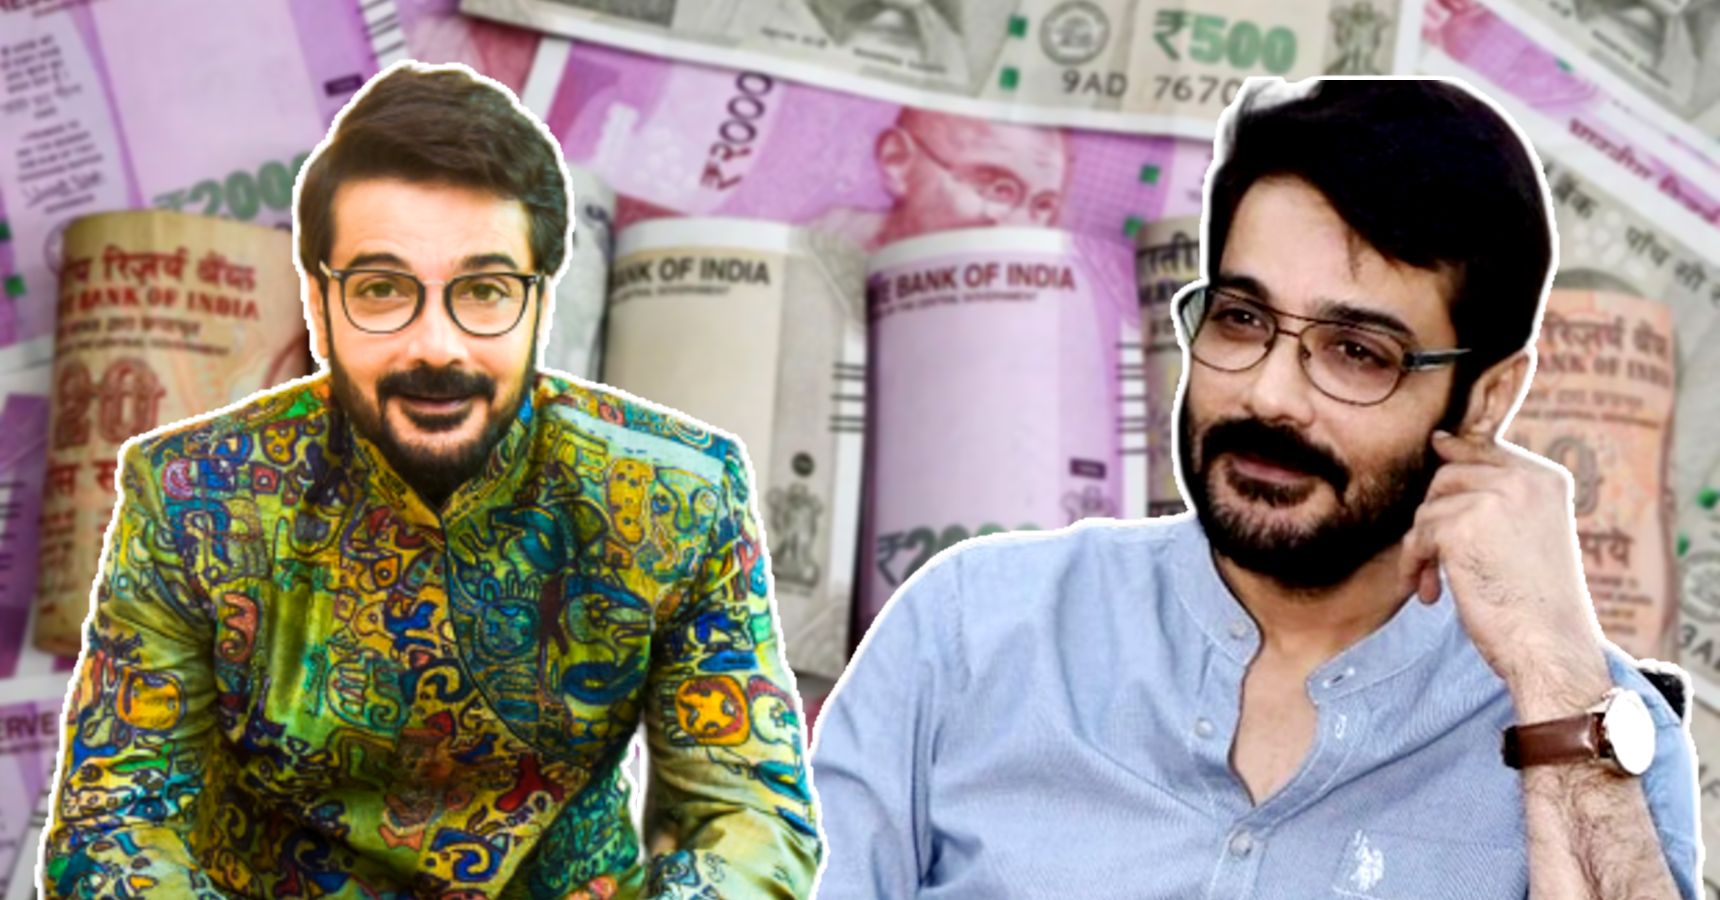 How much fees Tollywood superstar Prosenjit Chatterjee charges for a movie